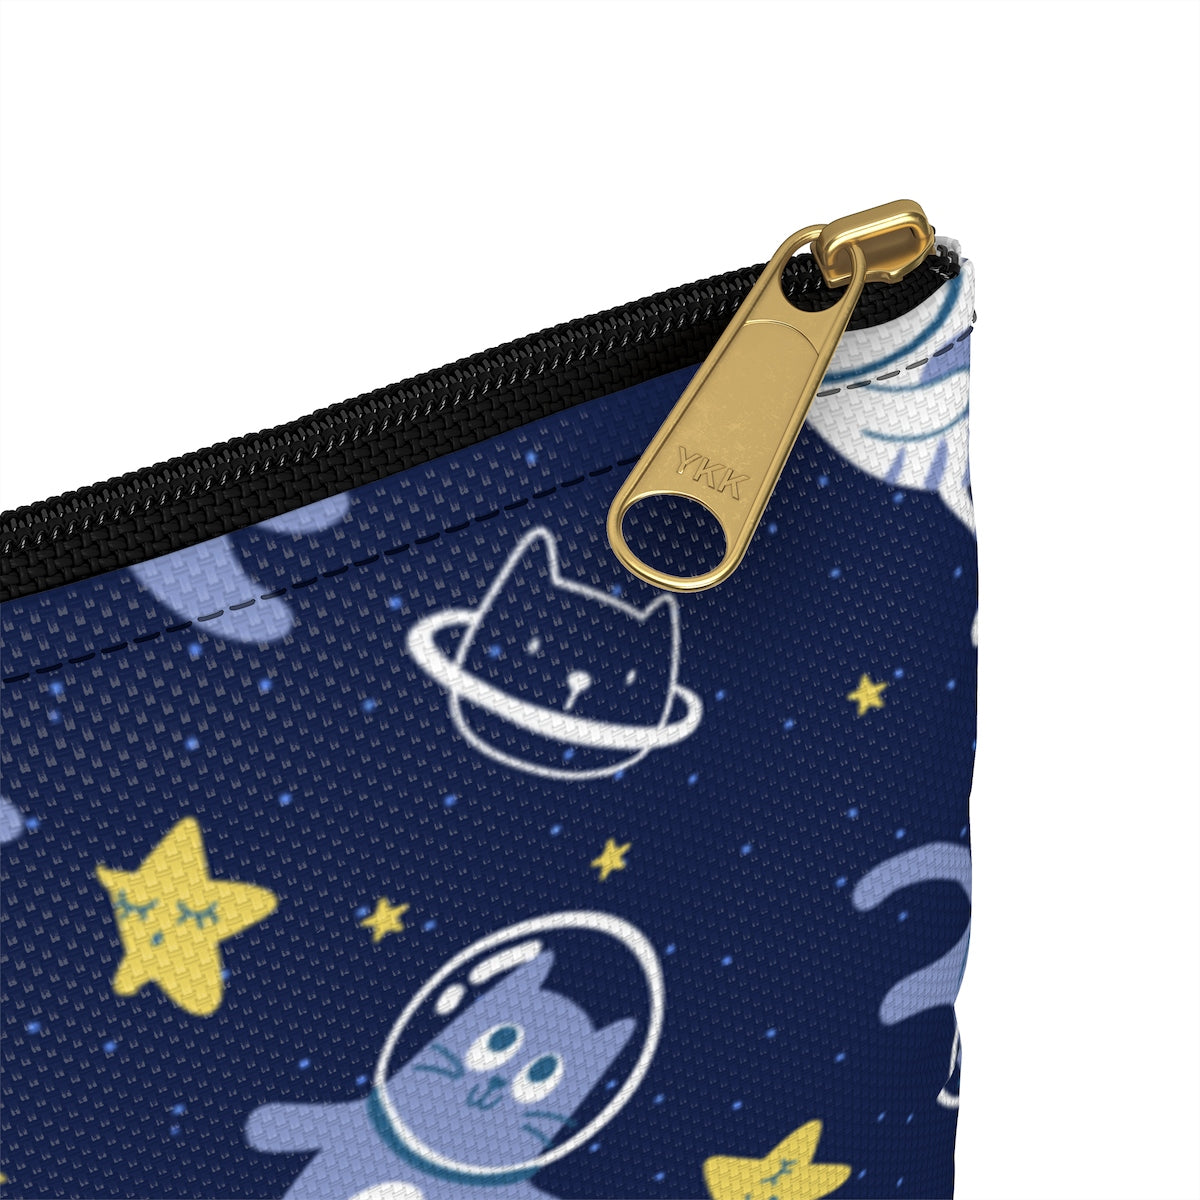 Cute Cats in Space Coin Purse, Cute Stars Space Makeup Bags Fun Cosmetic Travel Pouch Organizer Gifts for women, Accessory Pouch Pencil Case Starcove Fashion